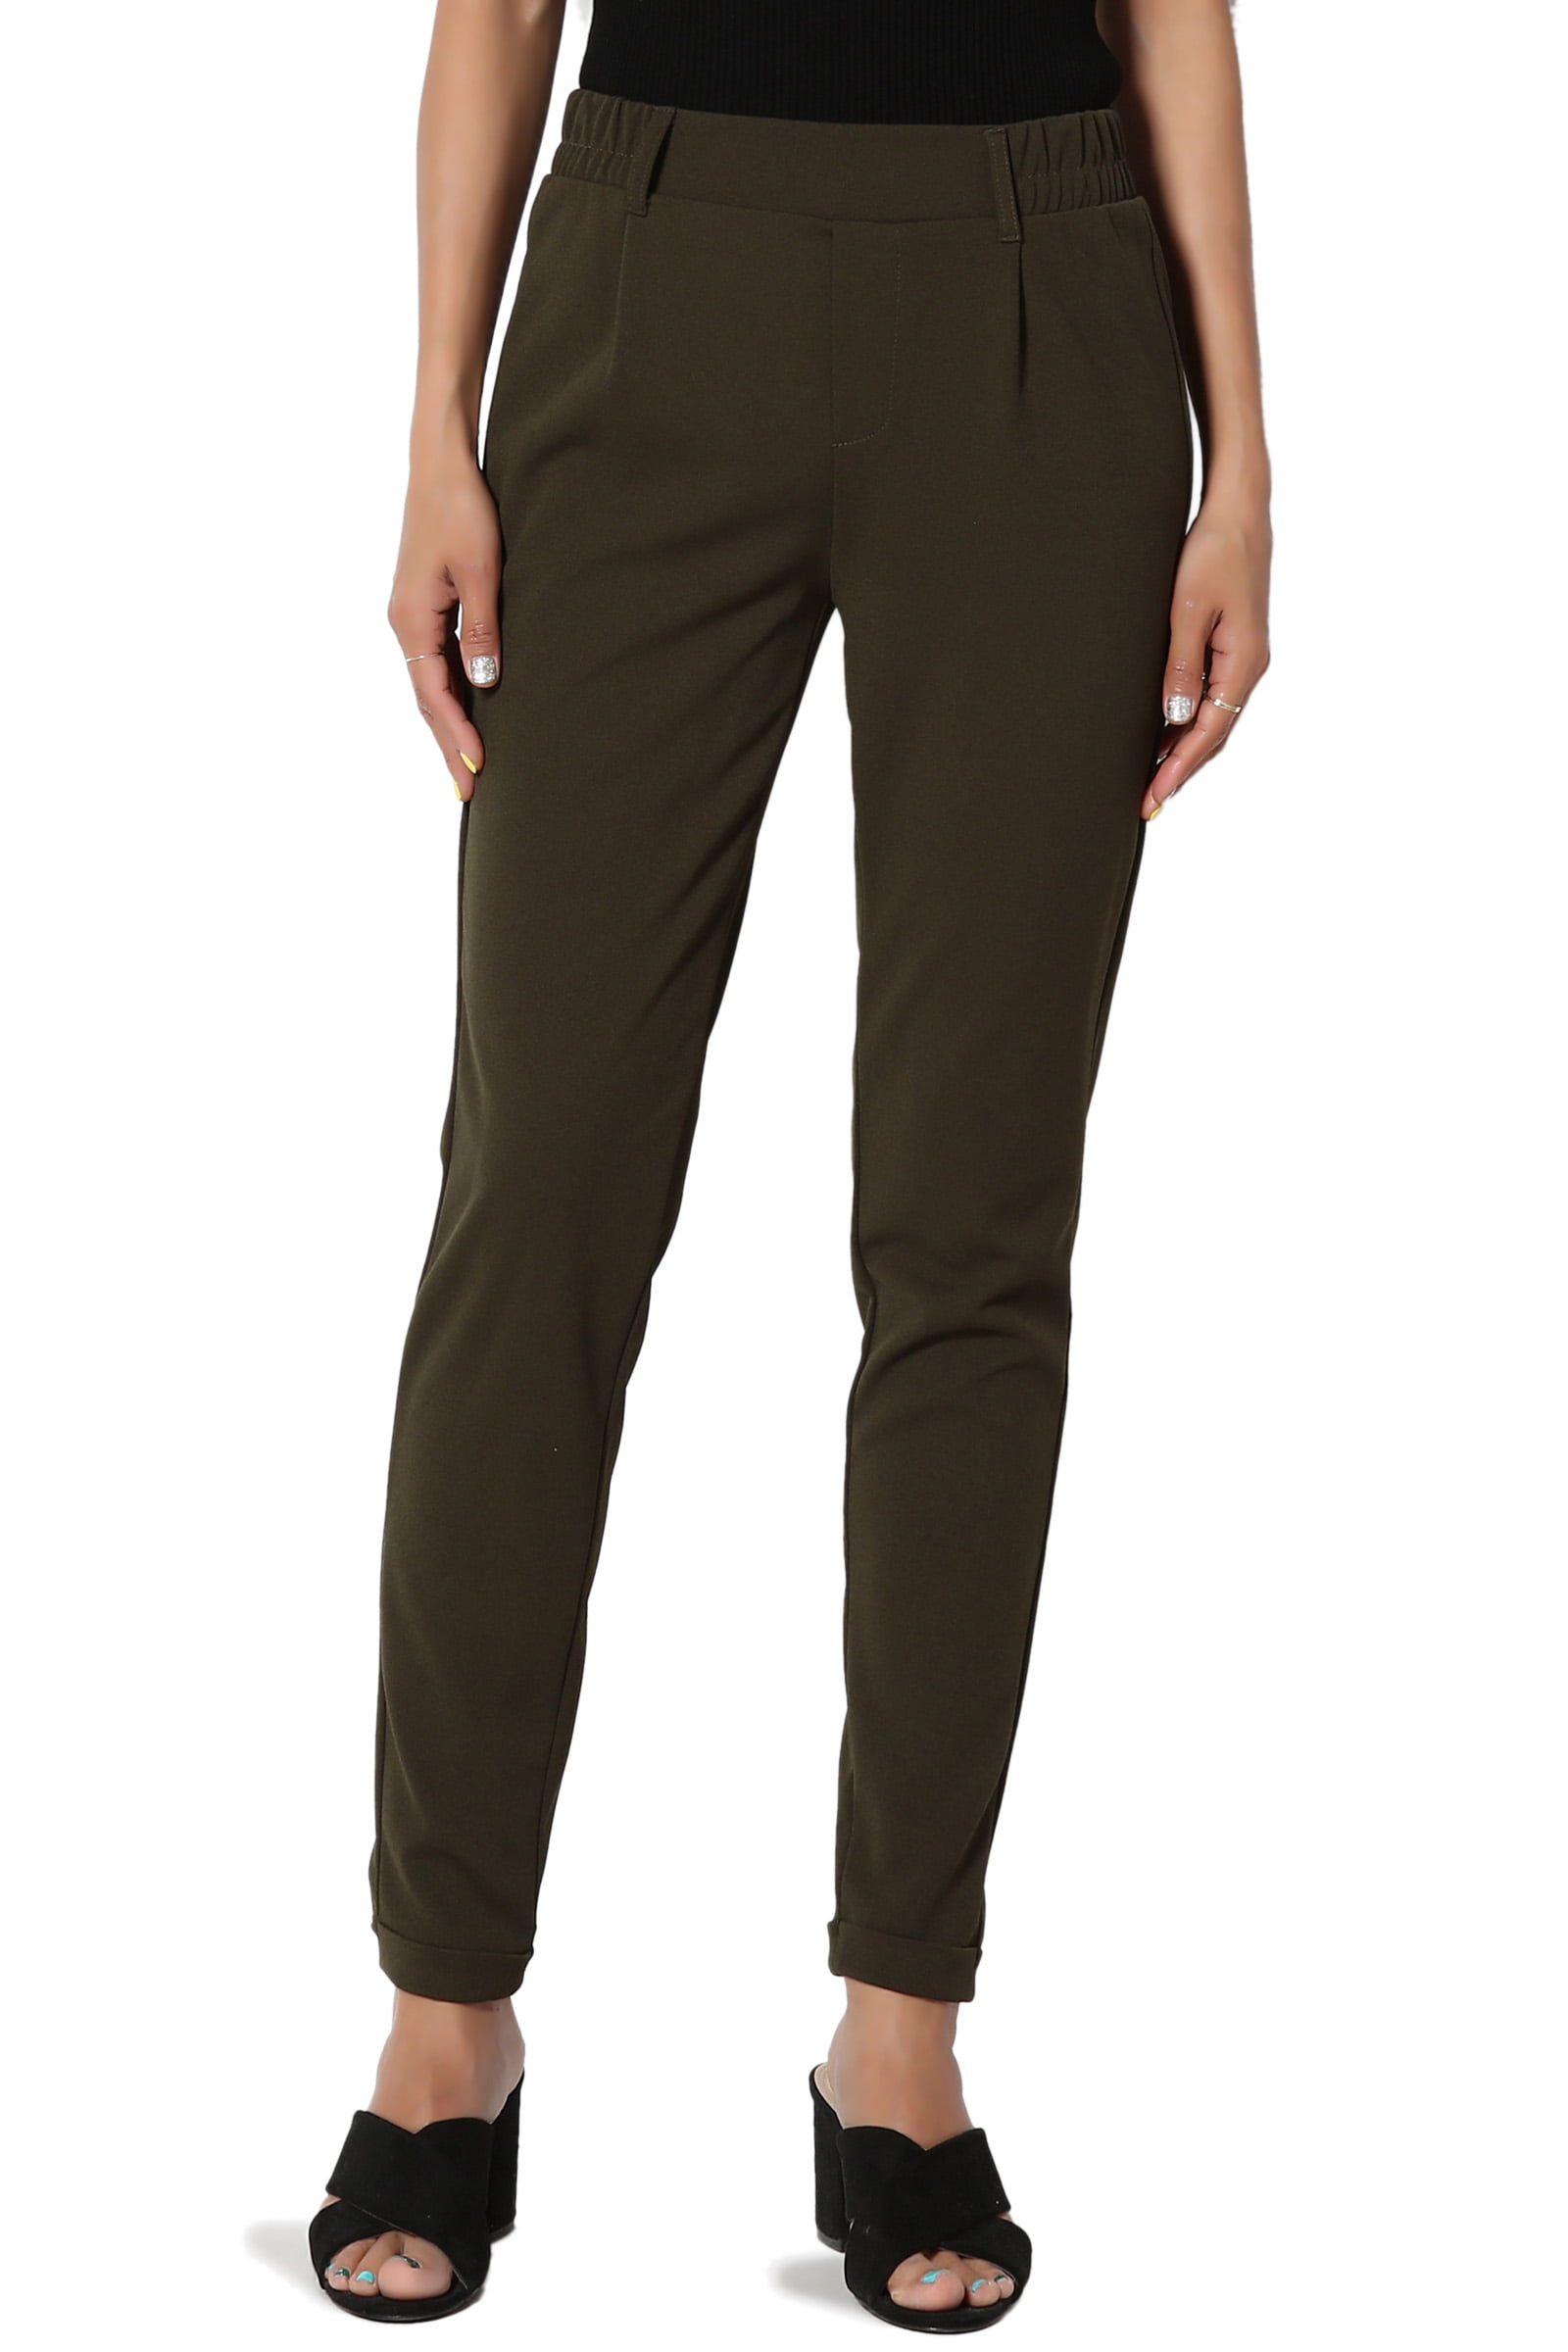 TheMogan Elastic Waist Stretch Crepe Tapered Leg Pants Mid Rise Pull-On Trousers